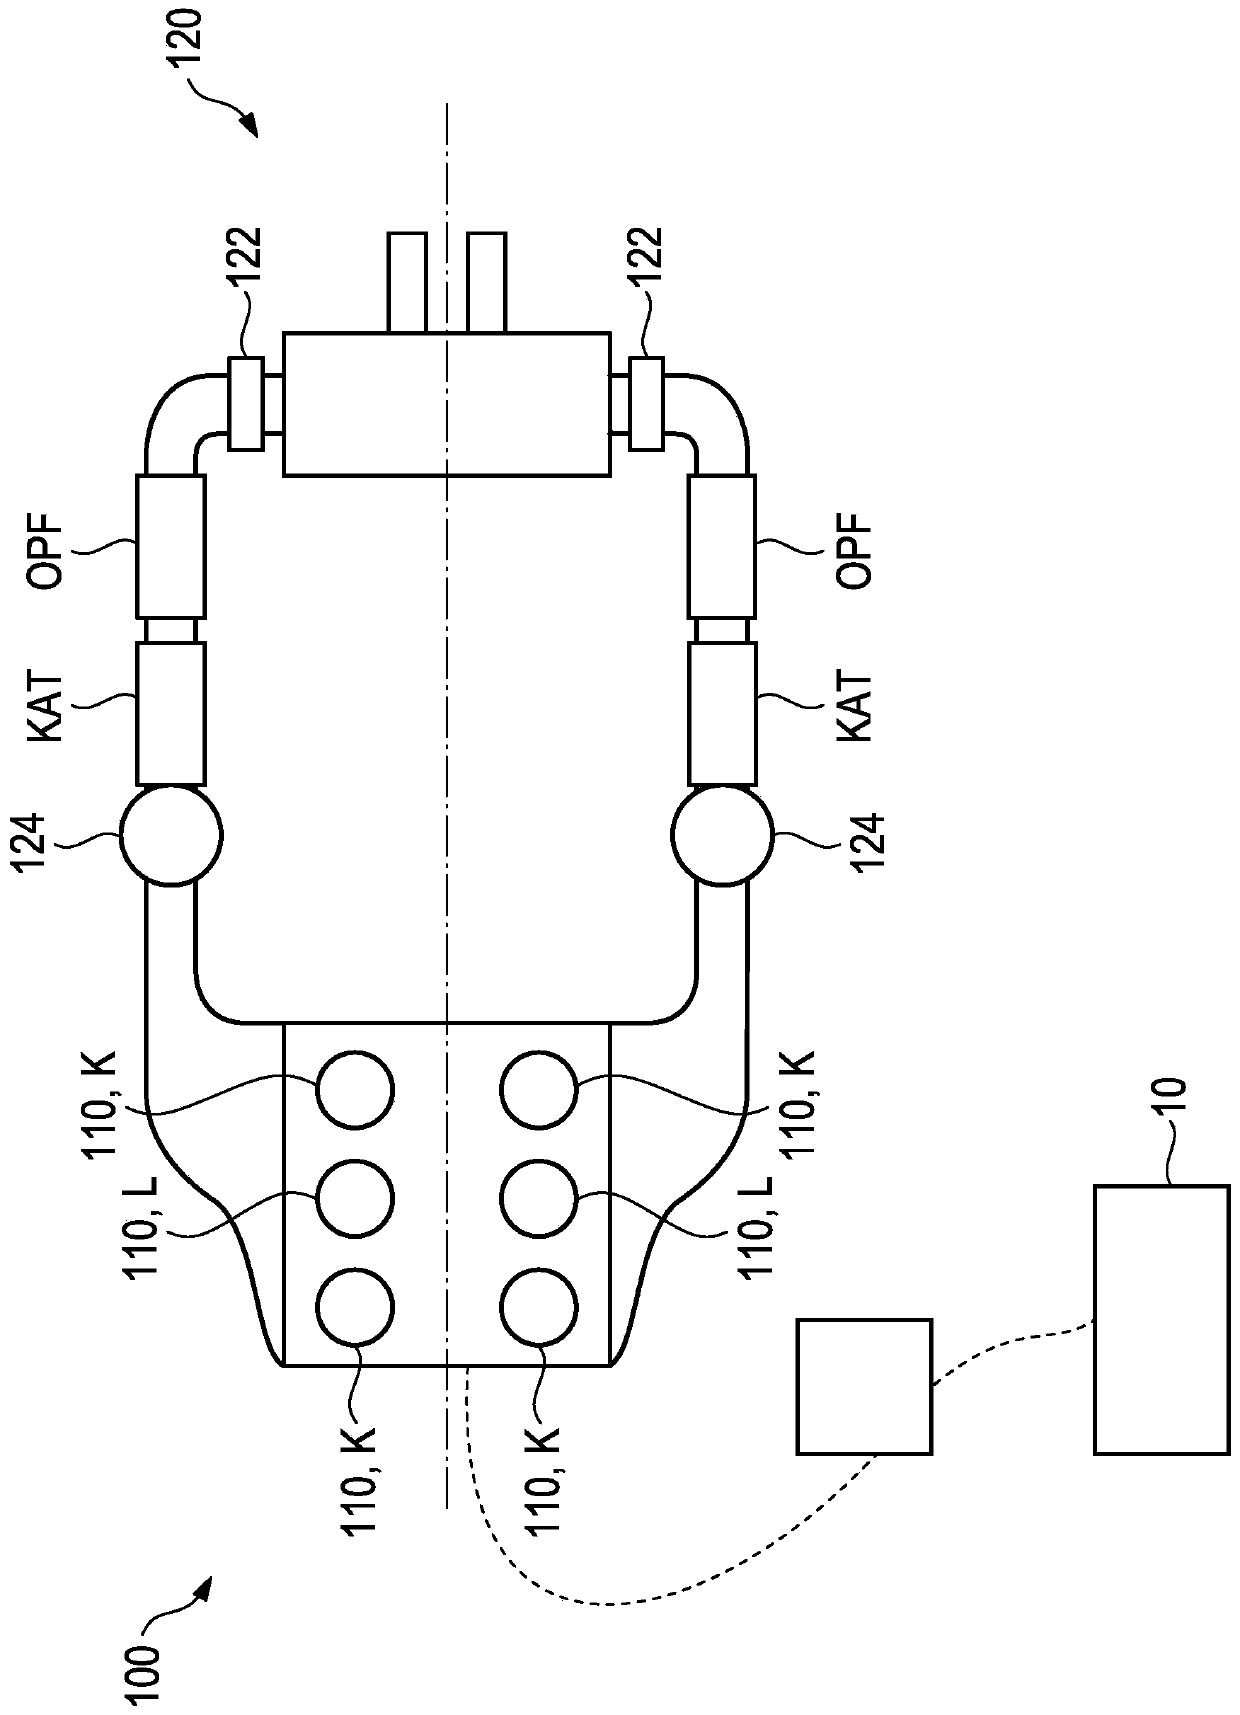 A method for regenerating an Otto particulate filter of a combustion engine of a vehicle